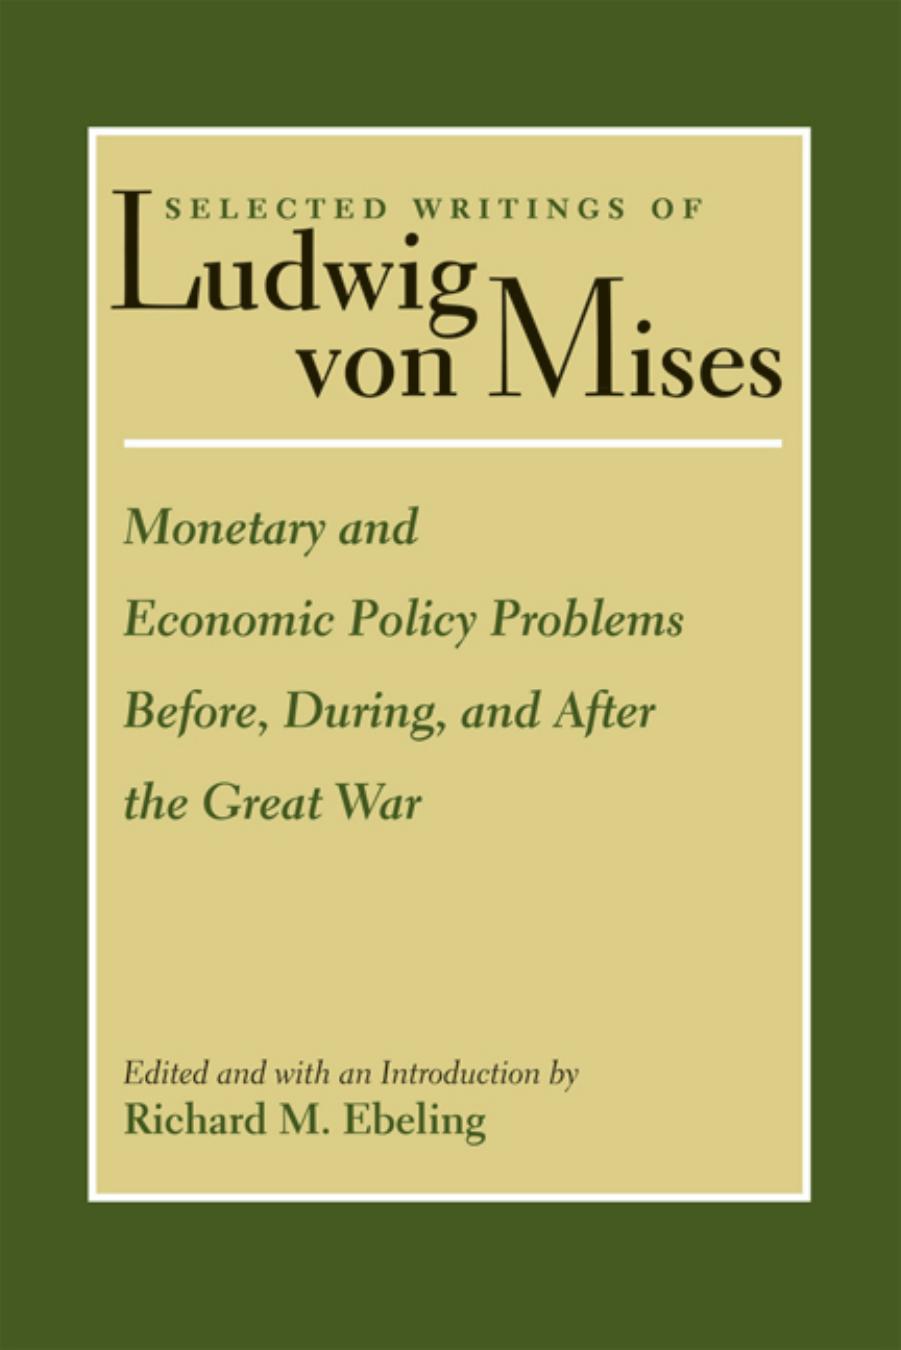 Monetary and Economic Policy Problems Before, During, and after the Great War by Ludwig von Mises; Richard Ebeling